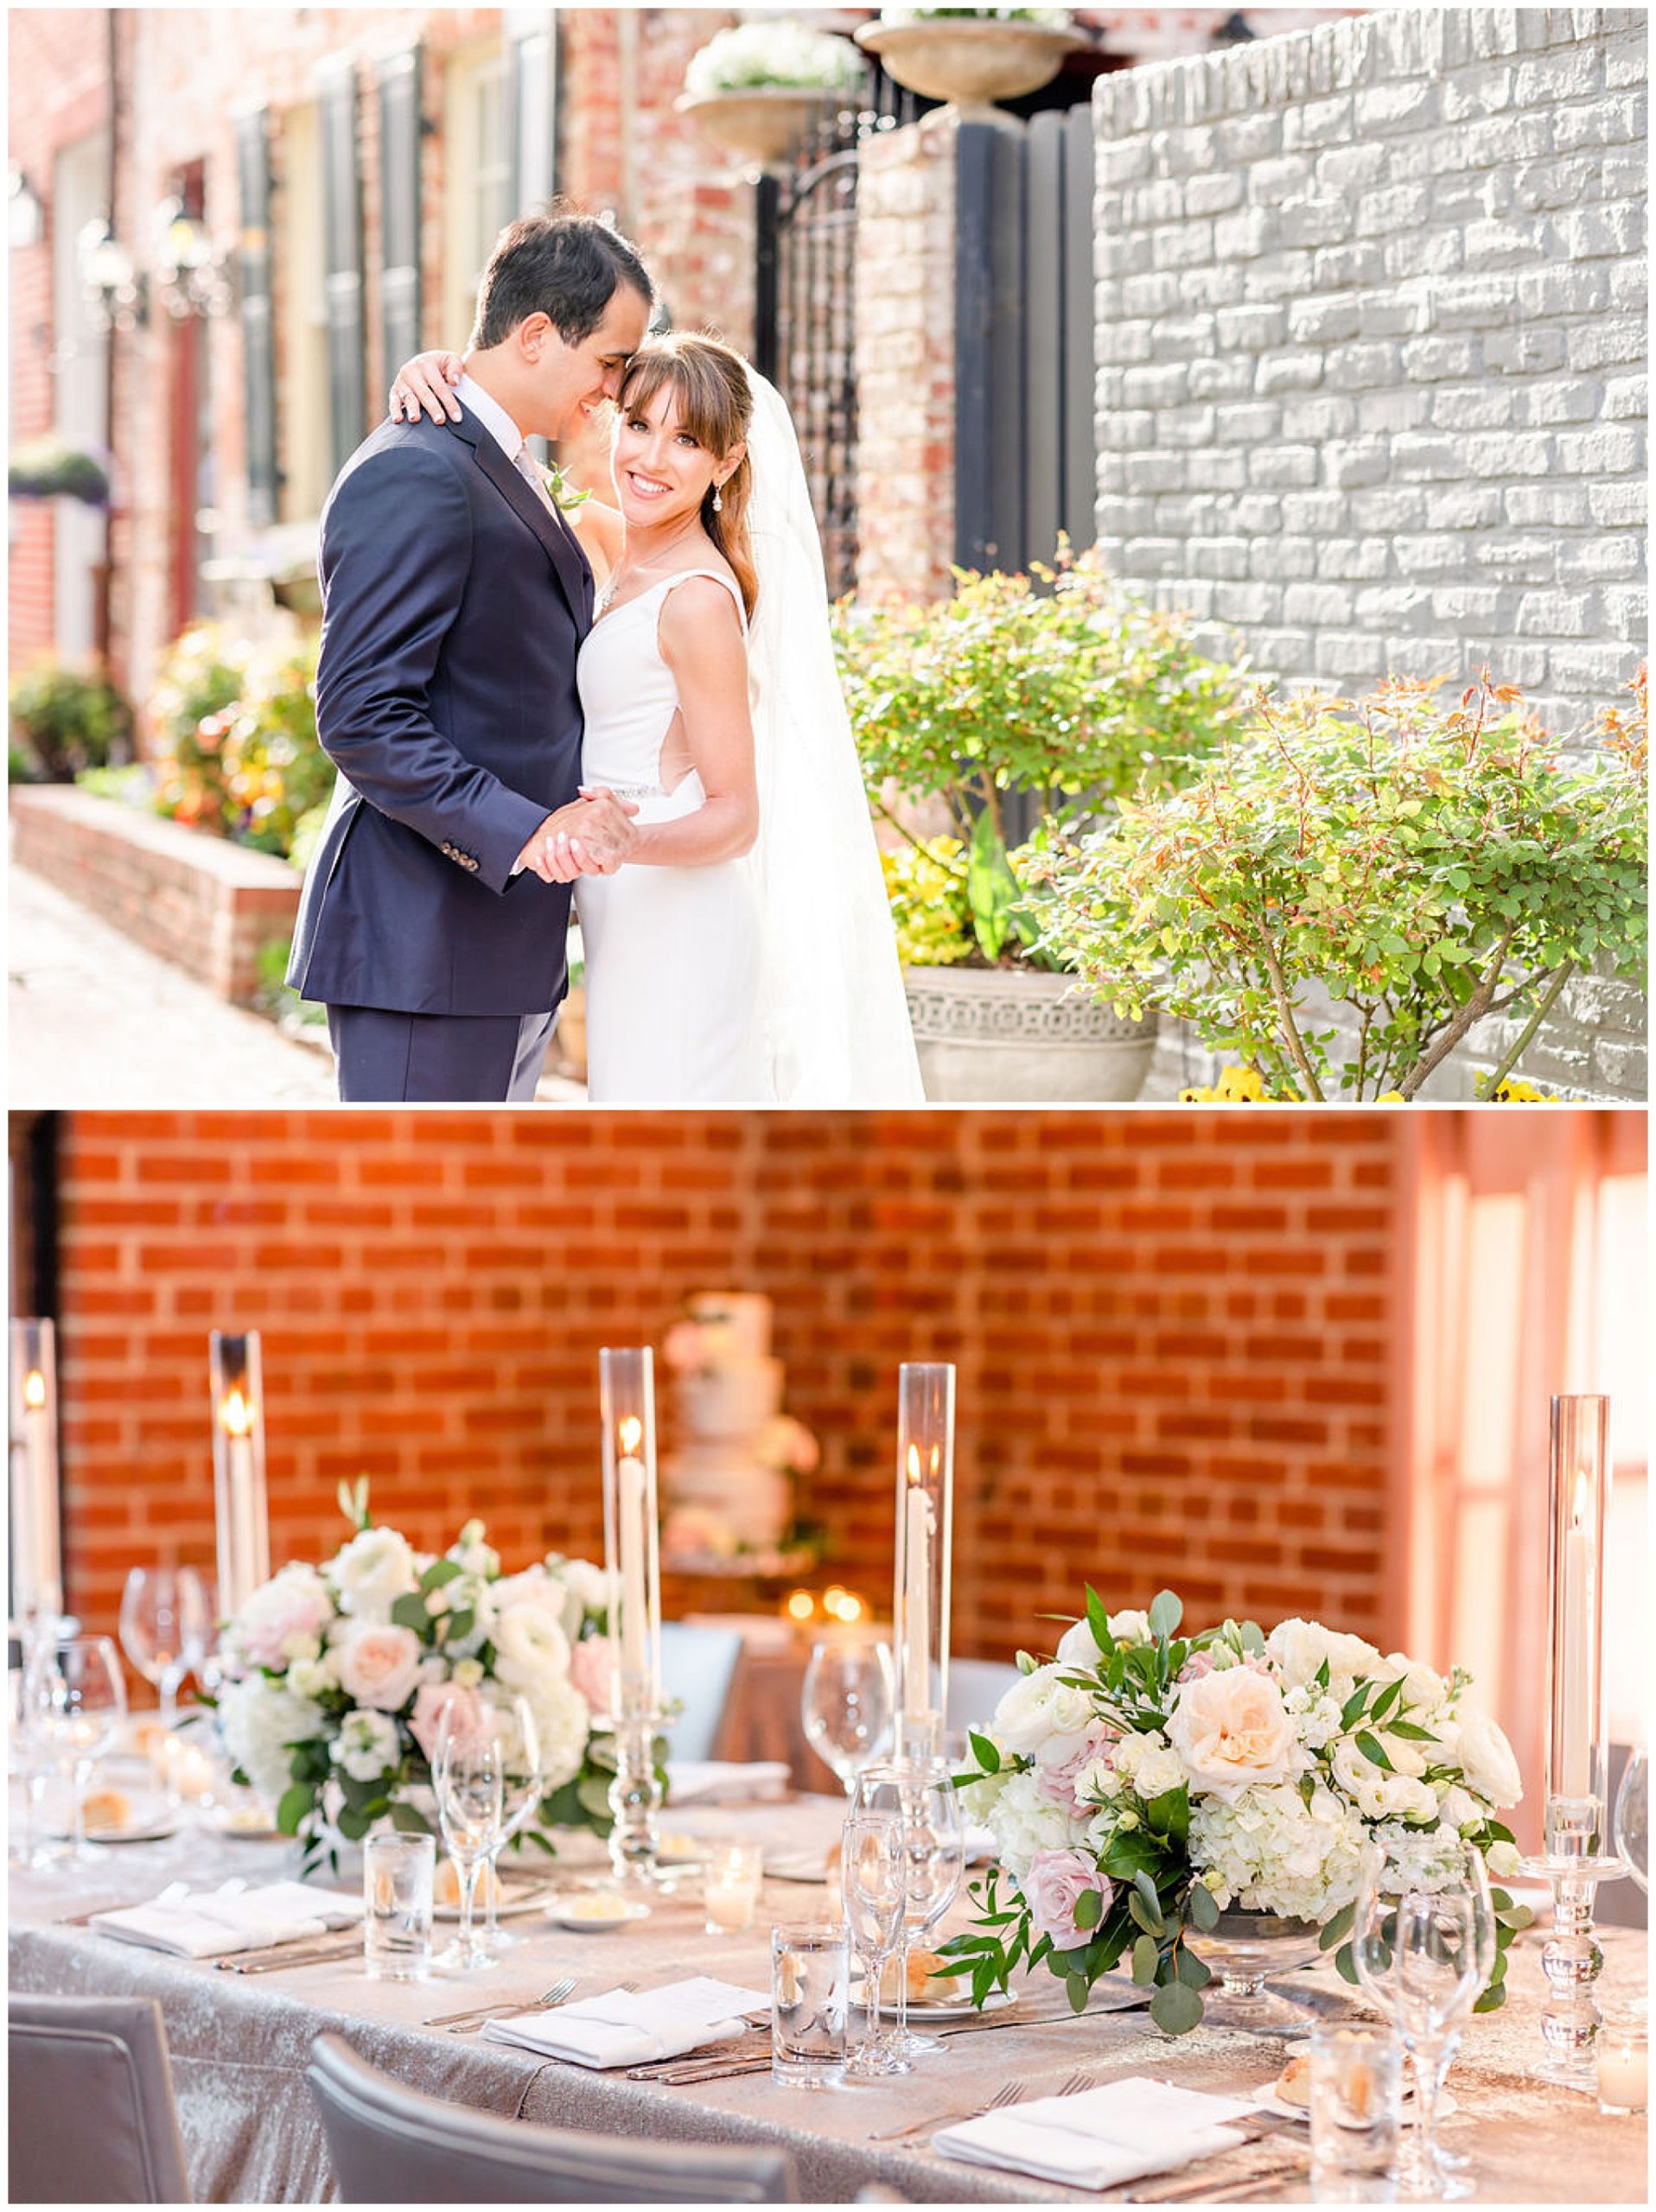 spring Ritz Carlton Georgetown wedding, Georgetown DC wedding, Georgetown Bride, Georgetown couple, DC couple, DC wedding venue, spring wedding, floral focused wedding, classic DC wedding, Ritz Carlton wedding, DC wedding photographer, Georgetown wedding photographer, Rachel E.H. Photography, reception tables with flowers and candles, groom resting nose on brides cheek, Bialek's Music